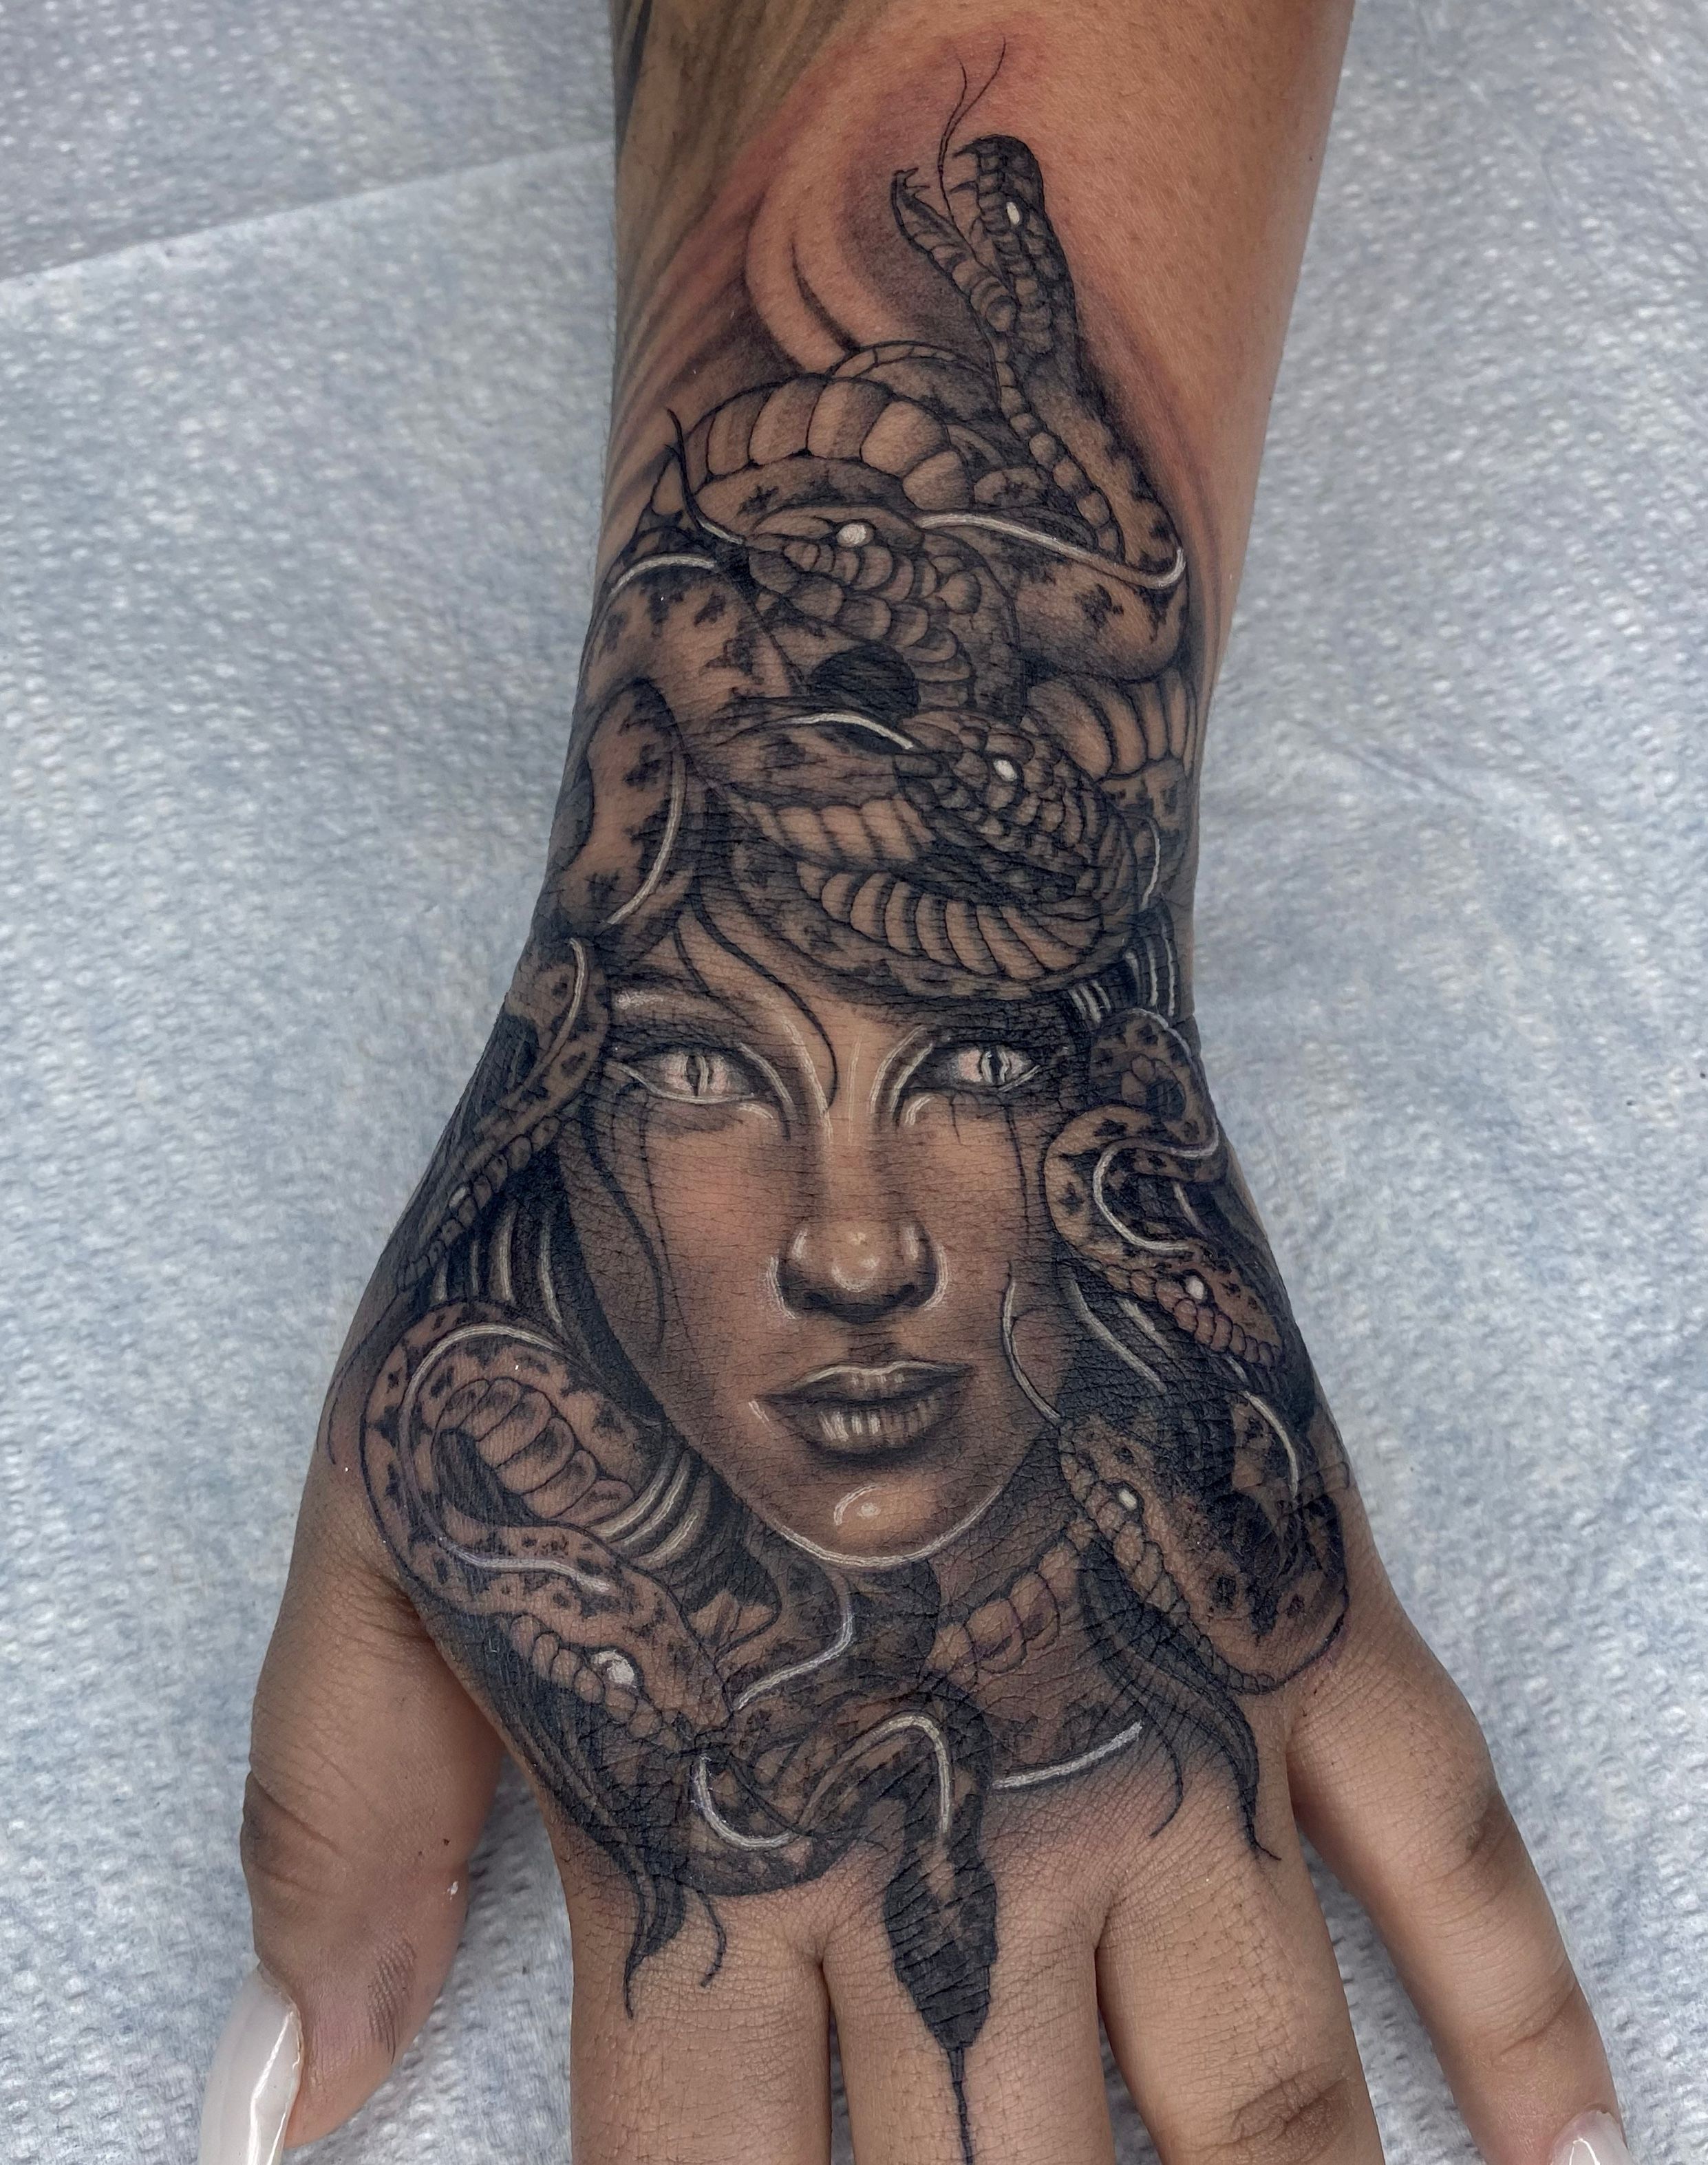 Medusa tattoo  design ideas and meaning  WithTattocom